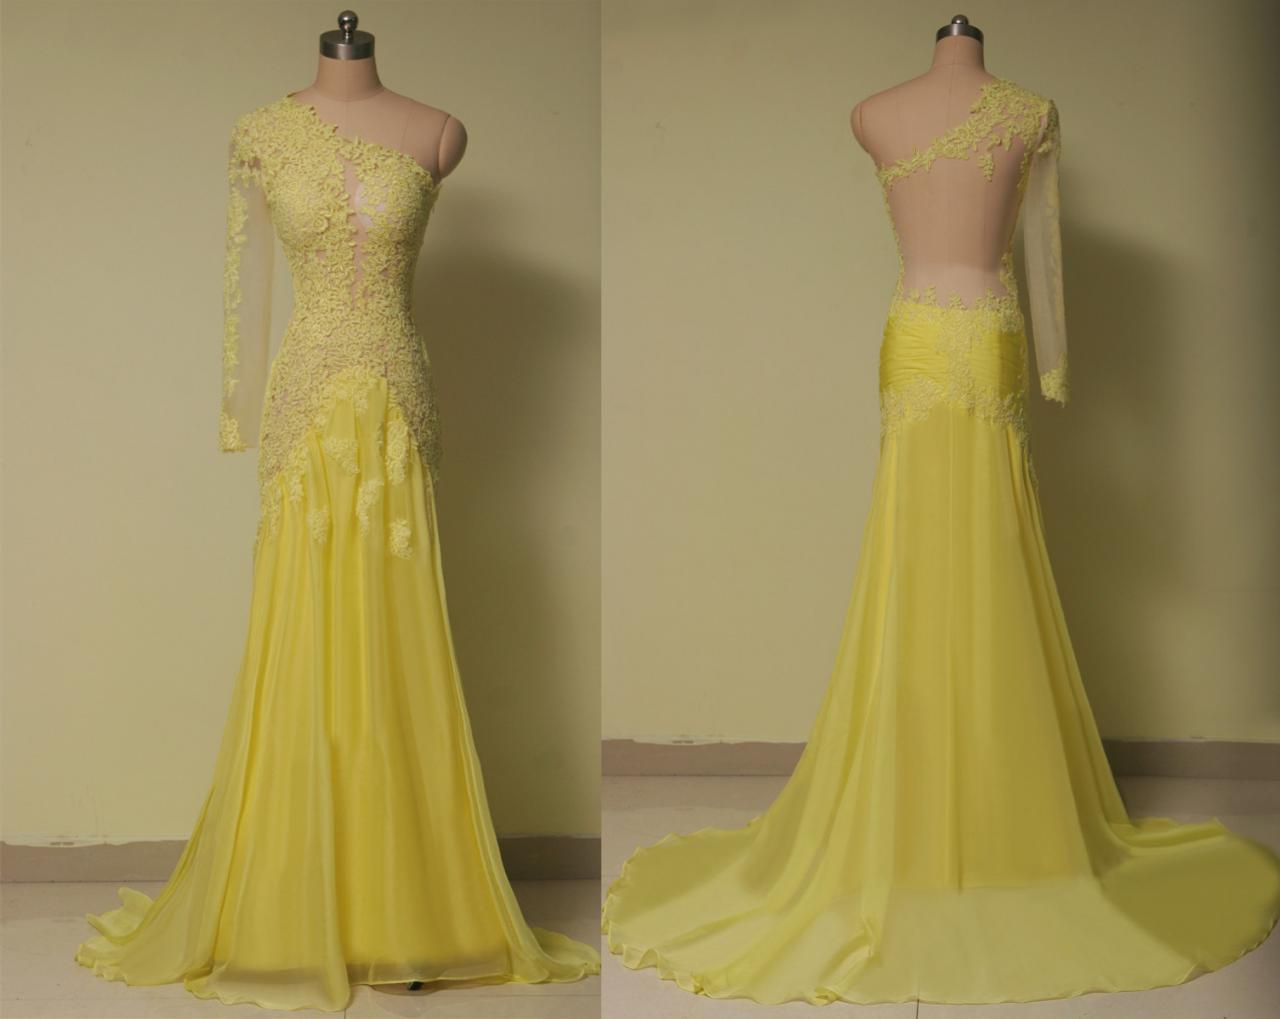 One Shoulder Prom Dresses,lace Evening Dress,chiffon Prom Dress,yellow Prom Dresses,backless Prom Gown,long Sleeves Prom Dress,fashion Evening